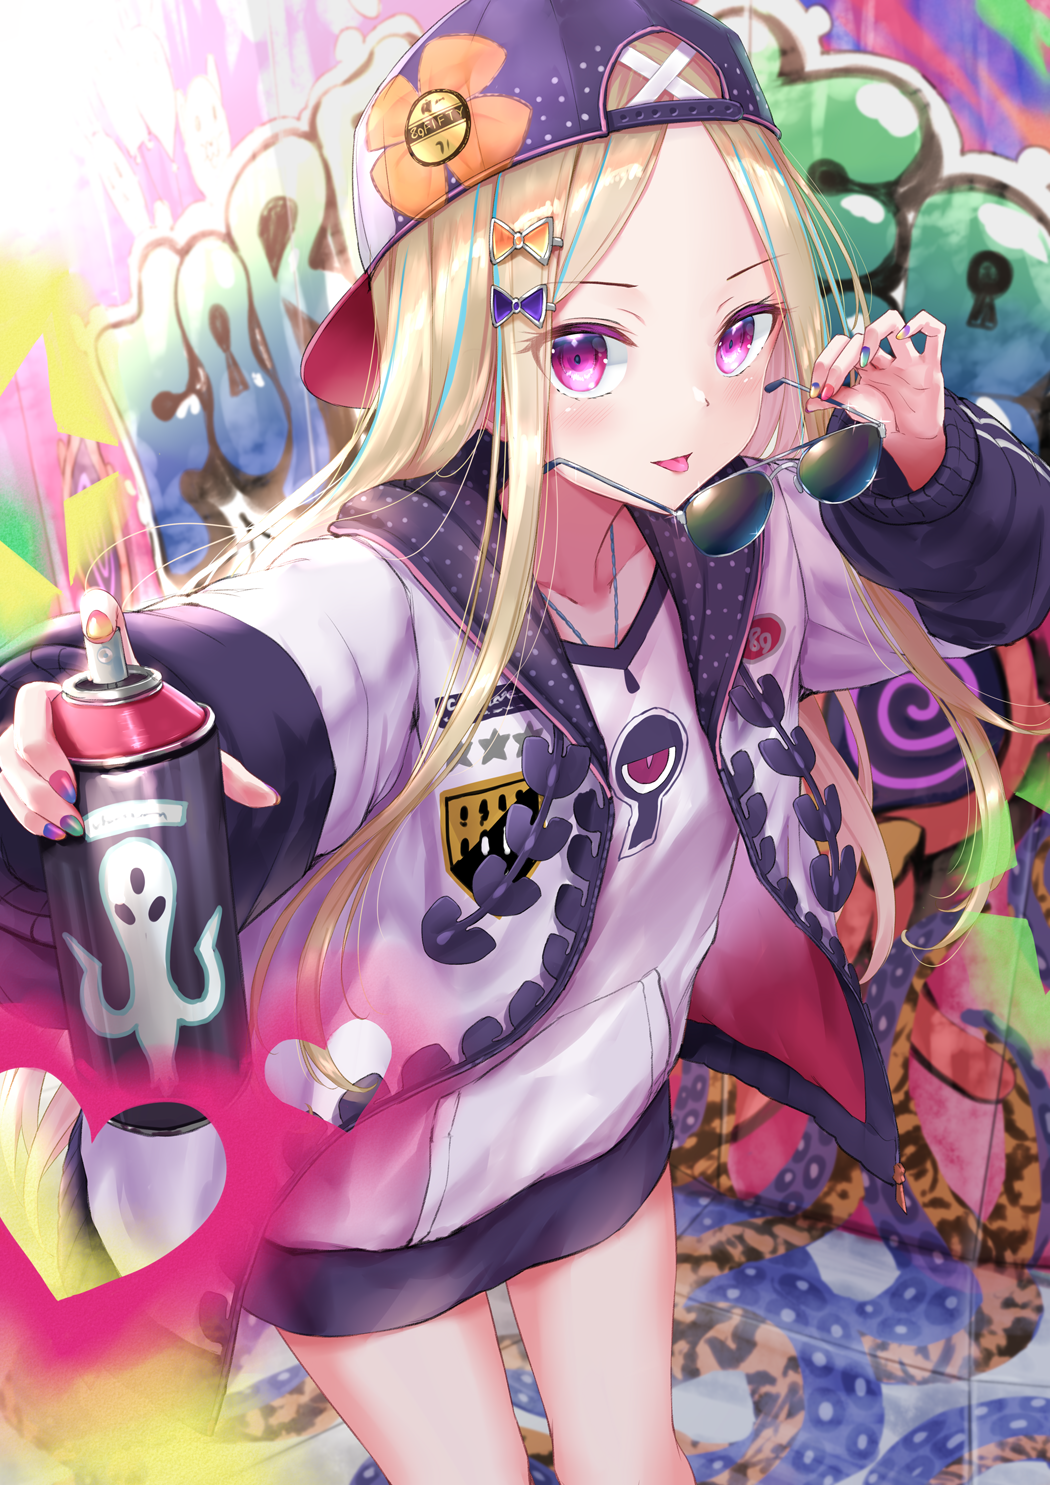 Anime 1050x1485 anime anime girls graffiti pink eyes blonde Fate series Fate/Grand Order Abigail Williams (Fate/Grand Order) tongue out